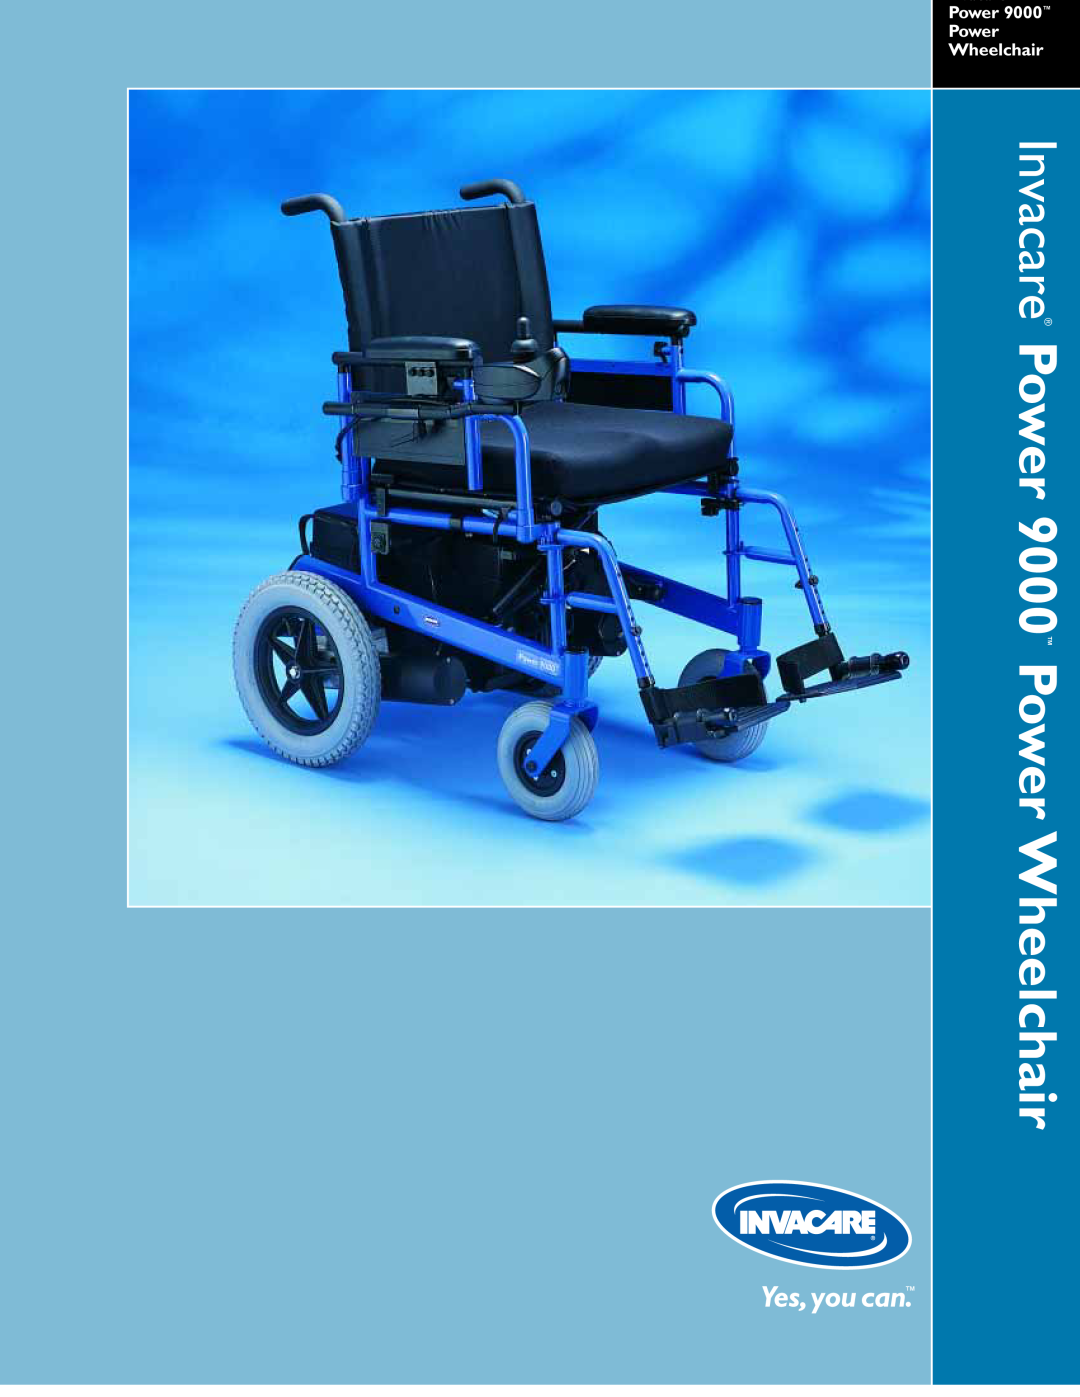 Invacare specifications Invacare Power 9000 Power Wheelchair, Power Power Wheelchair 